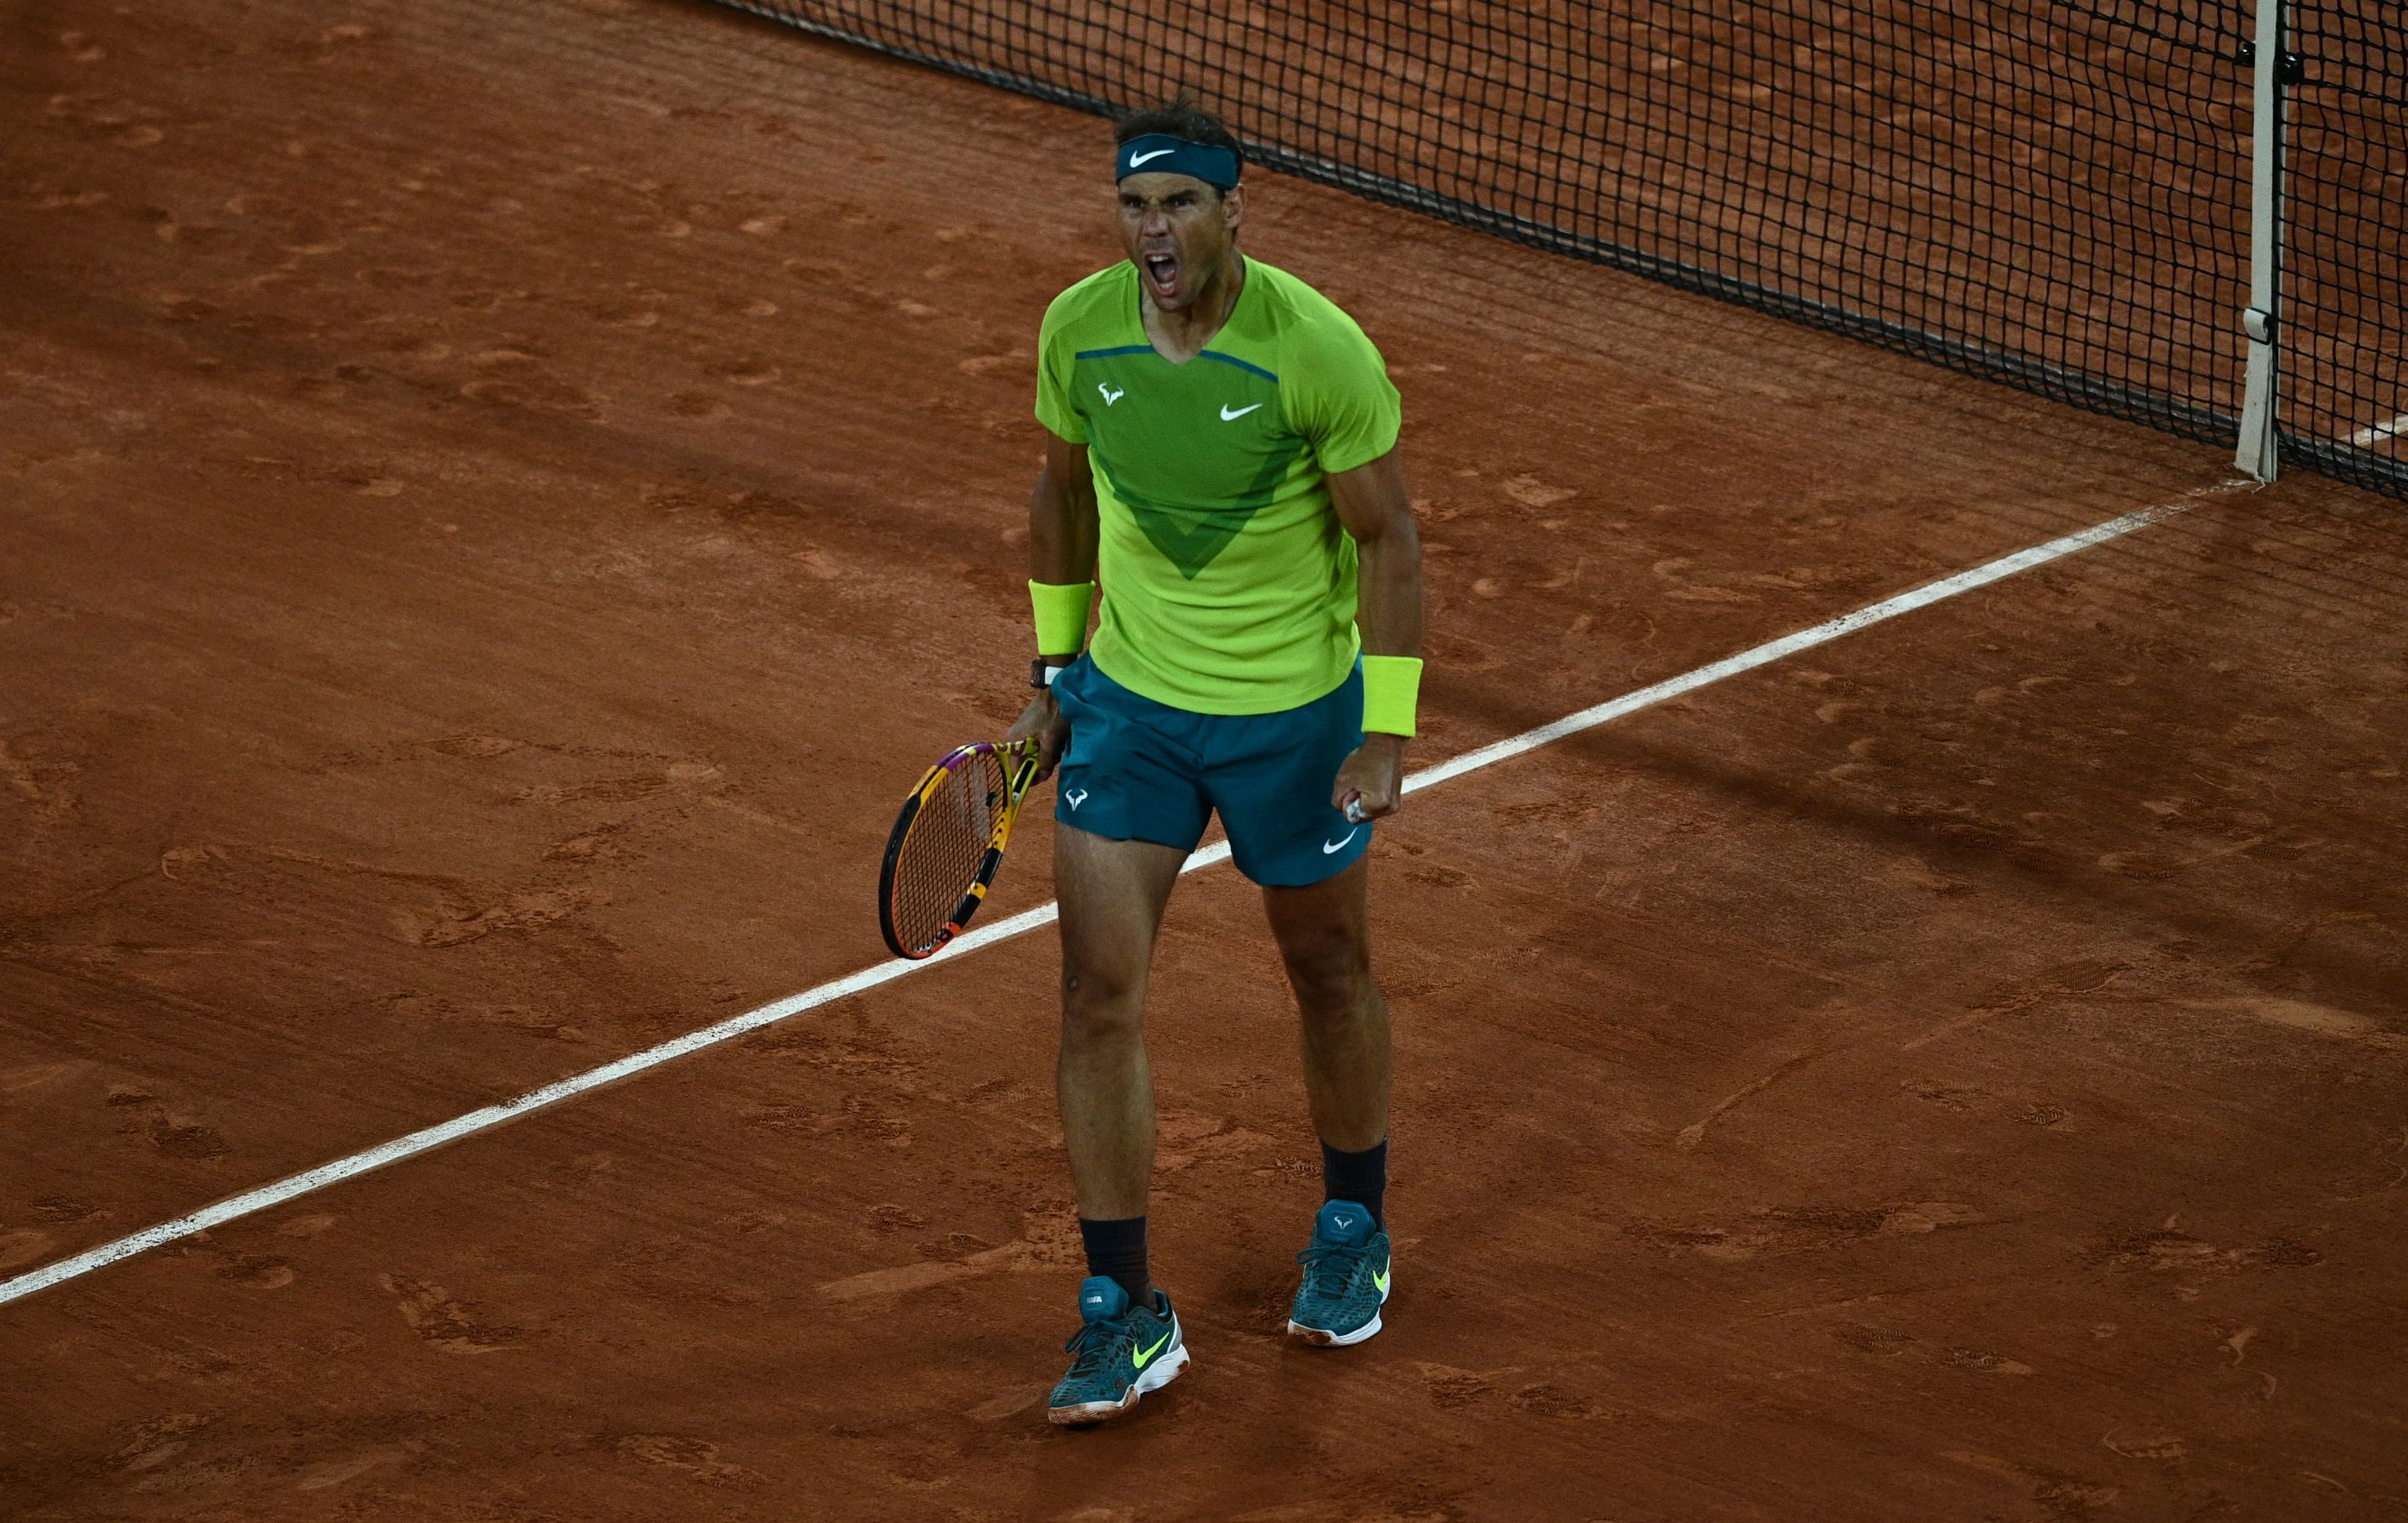 Nadal celebrates a point during the match against Djokovic.